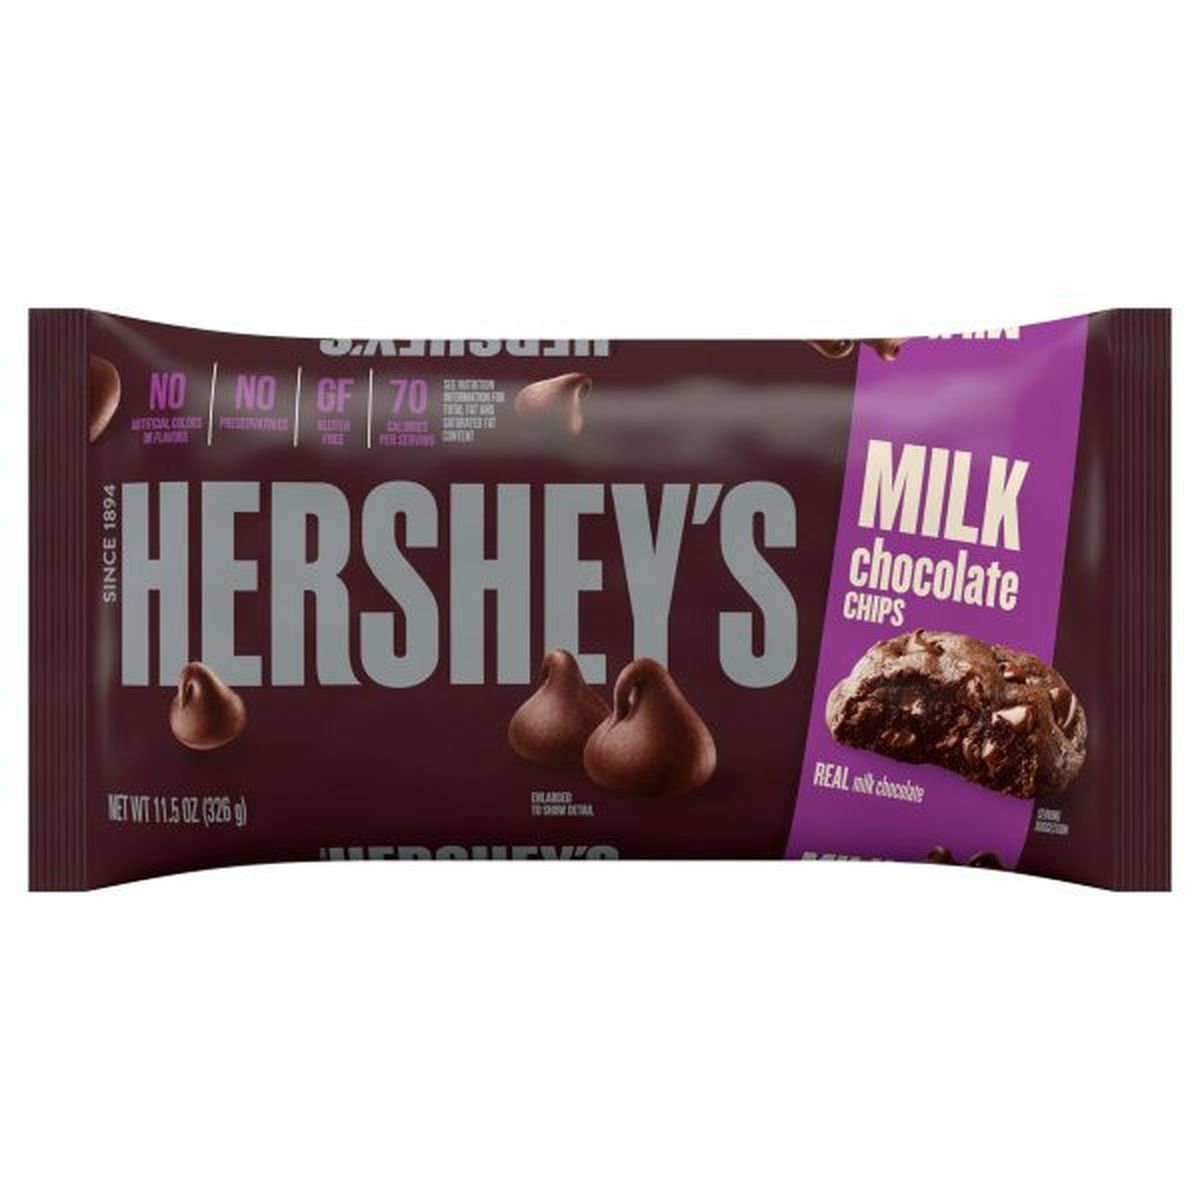 Calories in Hershey's Baking Chips, Milk Chocolate, Chocolate Chips, Holiday Baking